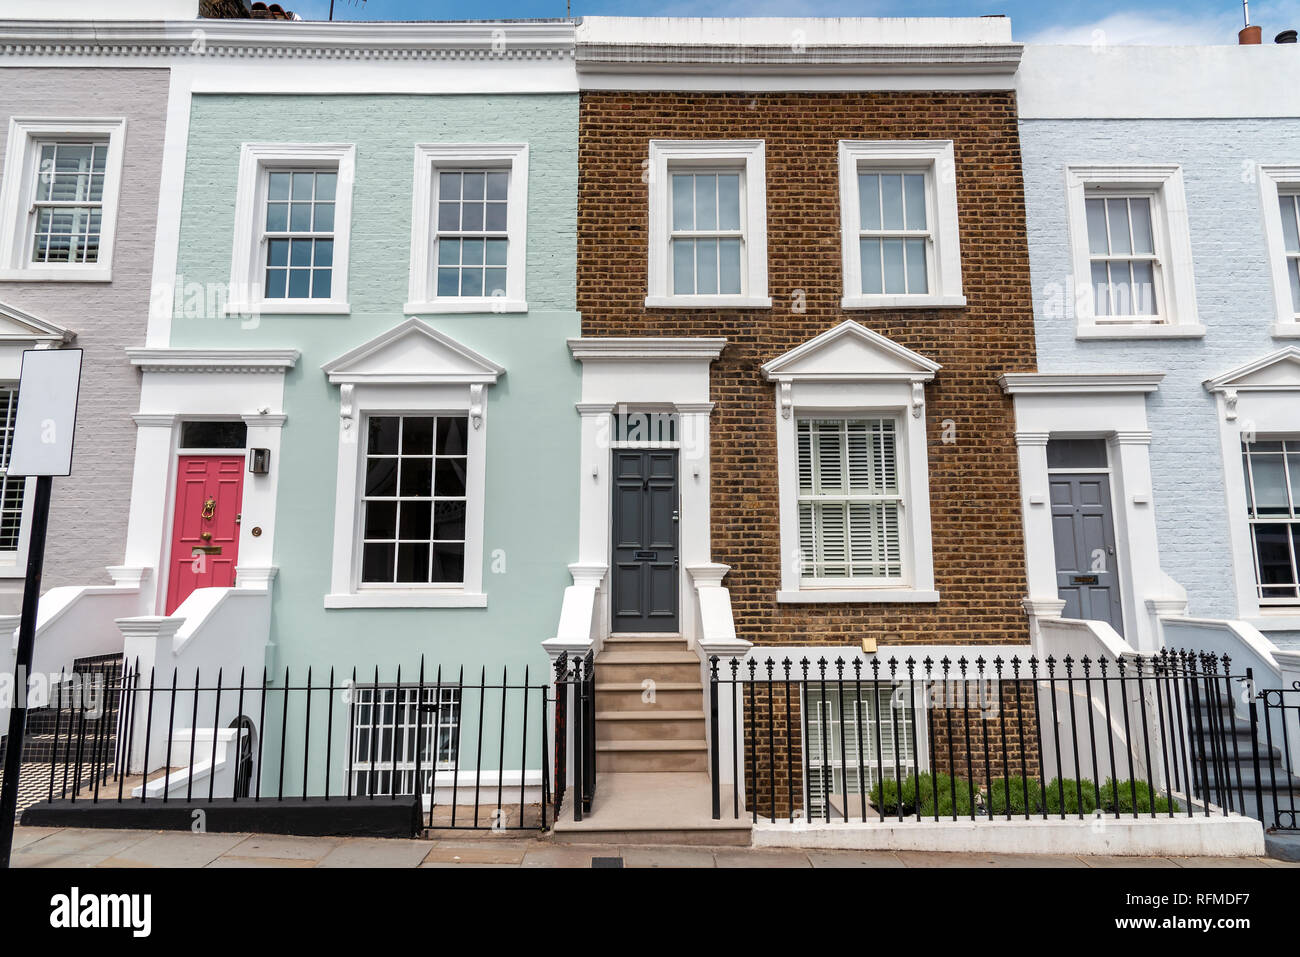 Colored row houses seen in Notting Hill, London Stock Photo